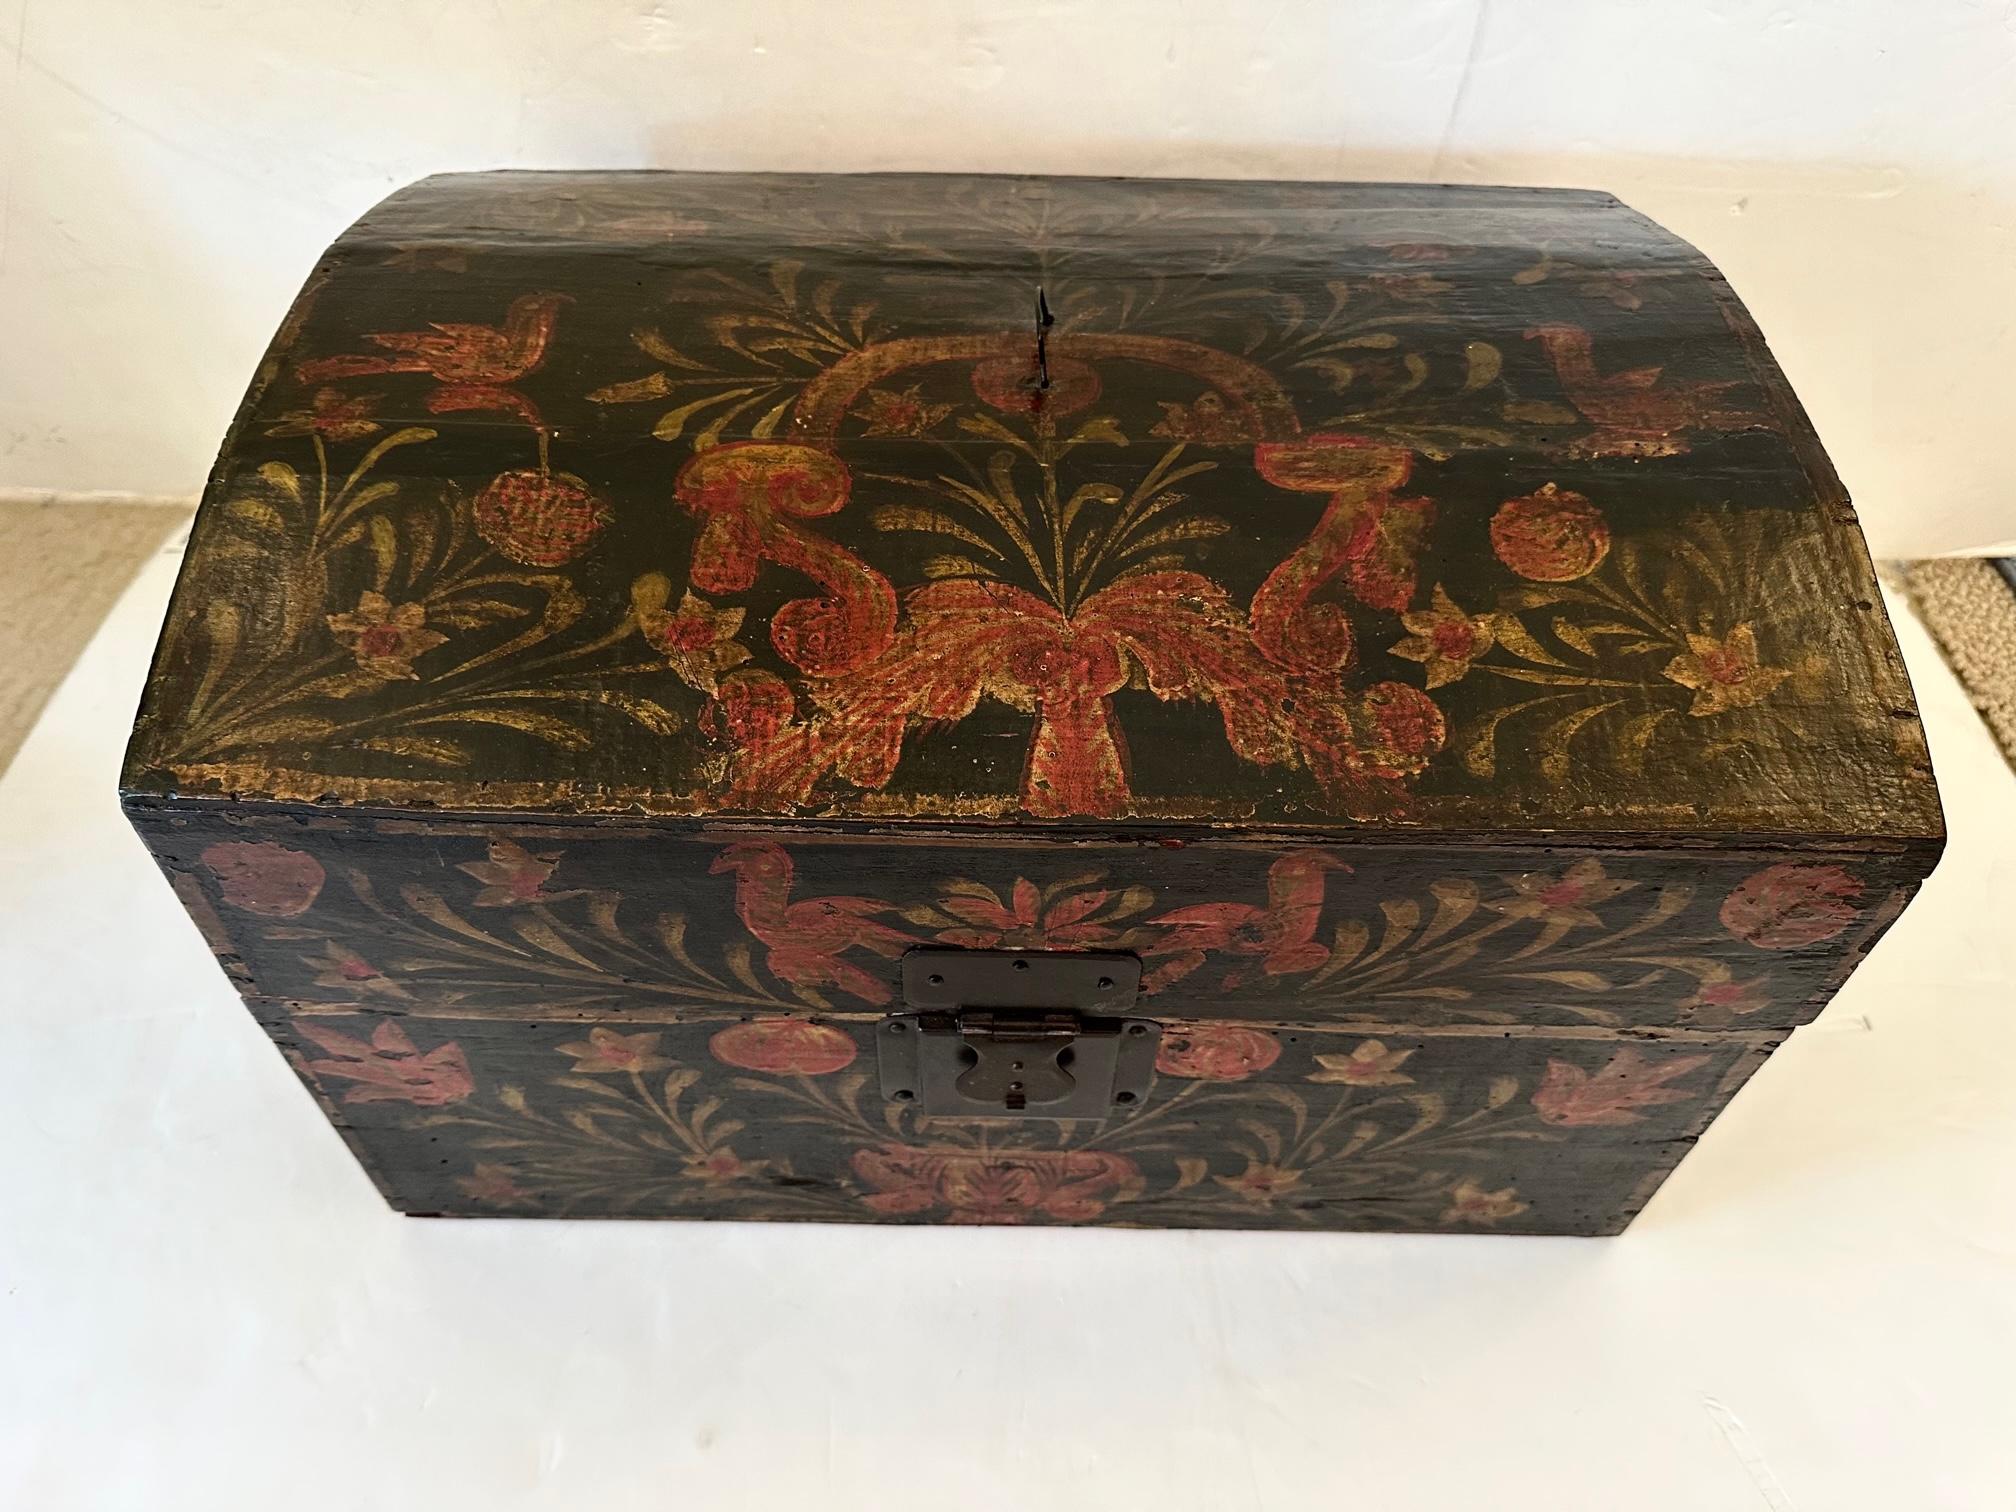 Gorgeous antique hand painted folk art treasure box having black background with red and green rustic decoration, original lock with key, and red interior.